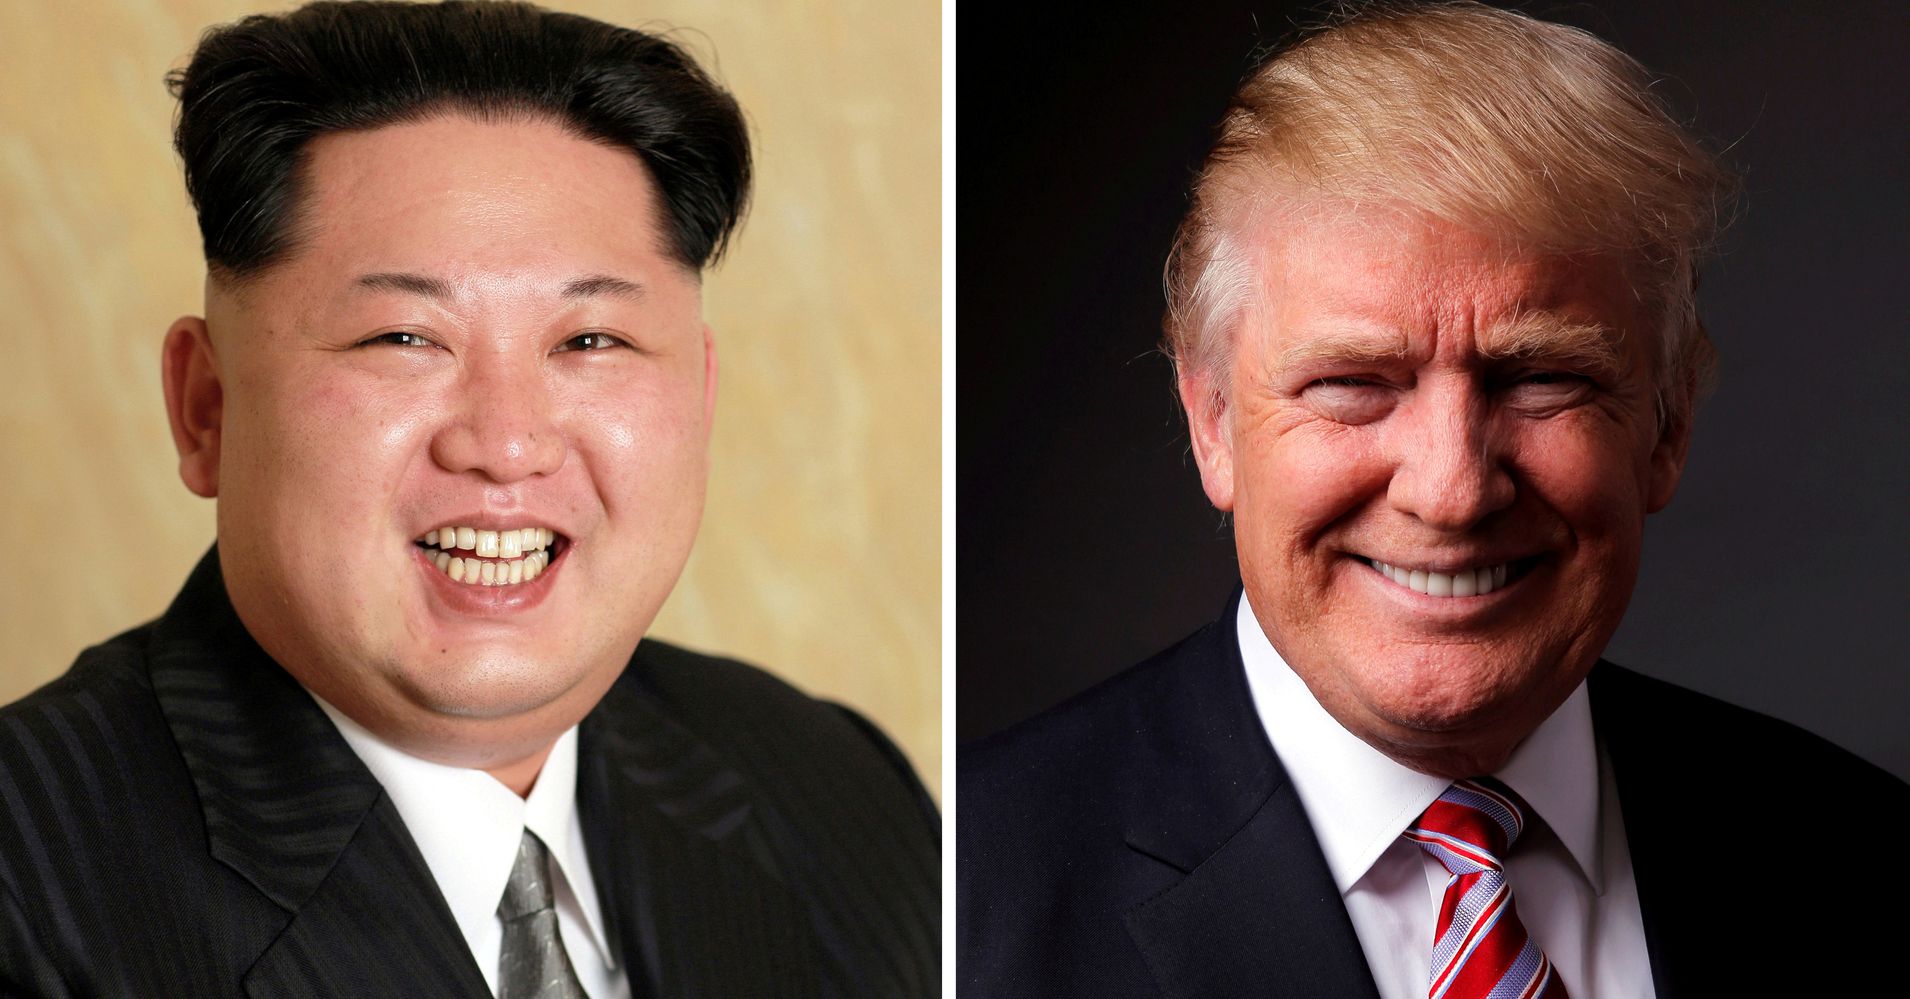 Someone Flipped Trumps Hair With Kim Jong Uns And Its Absolutely